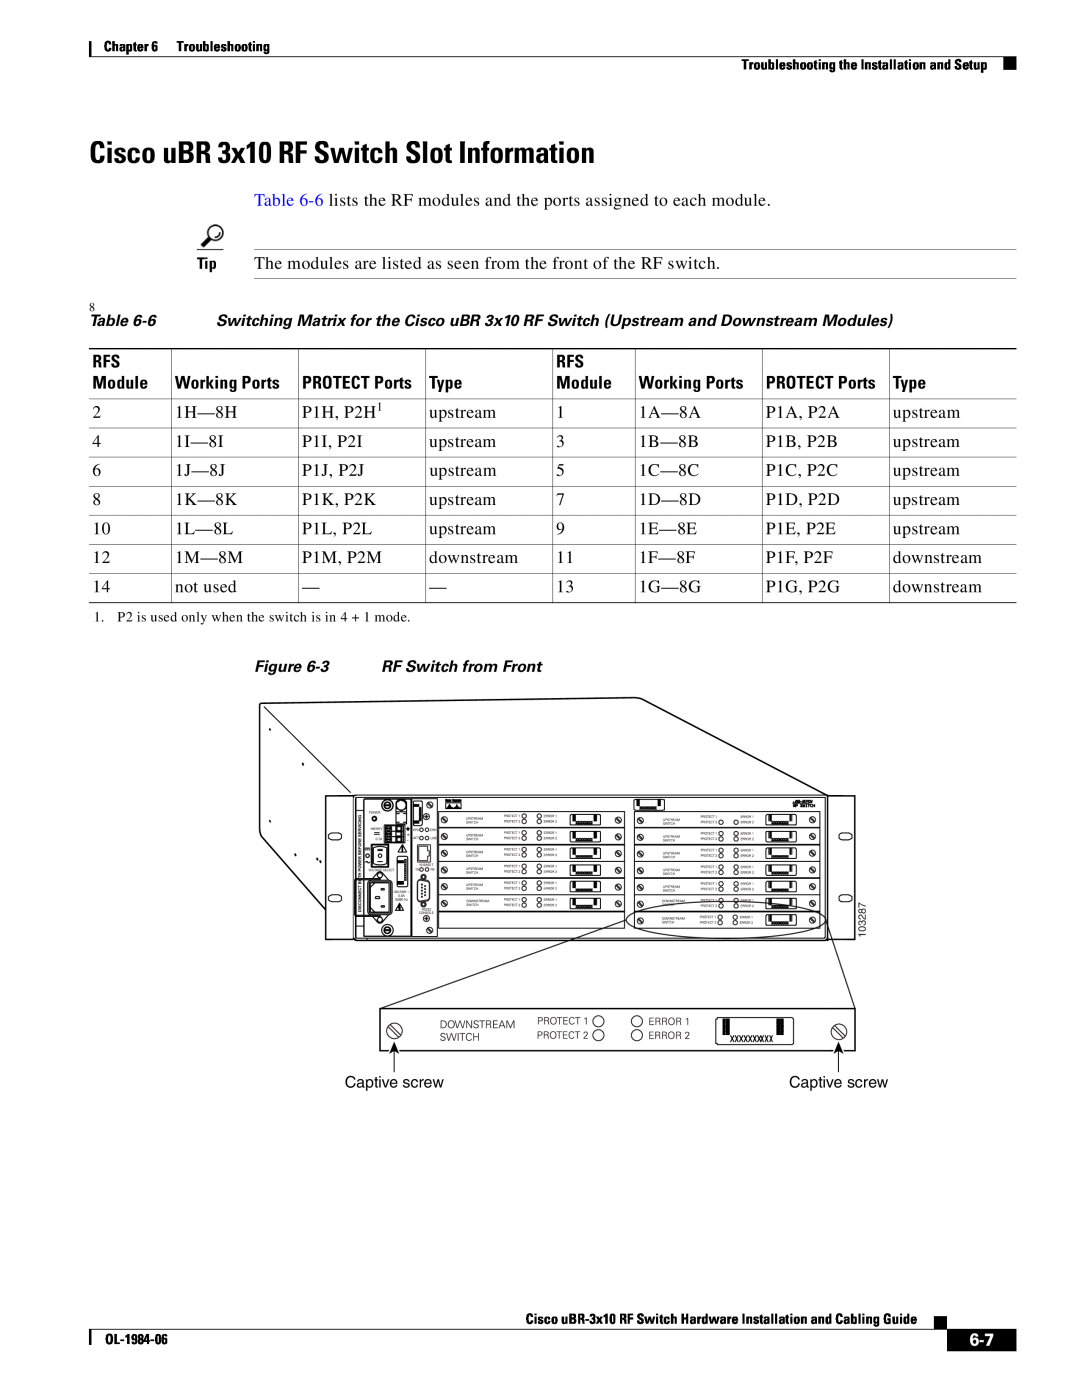 Cisco Systems UBR-3X10 manual Cisco uBR 3x10 RF Switch Slot Information, RF Switch from Front 